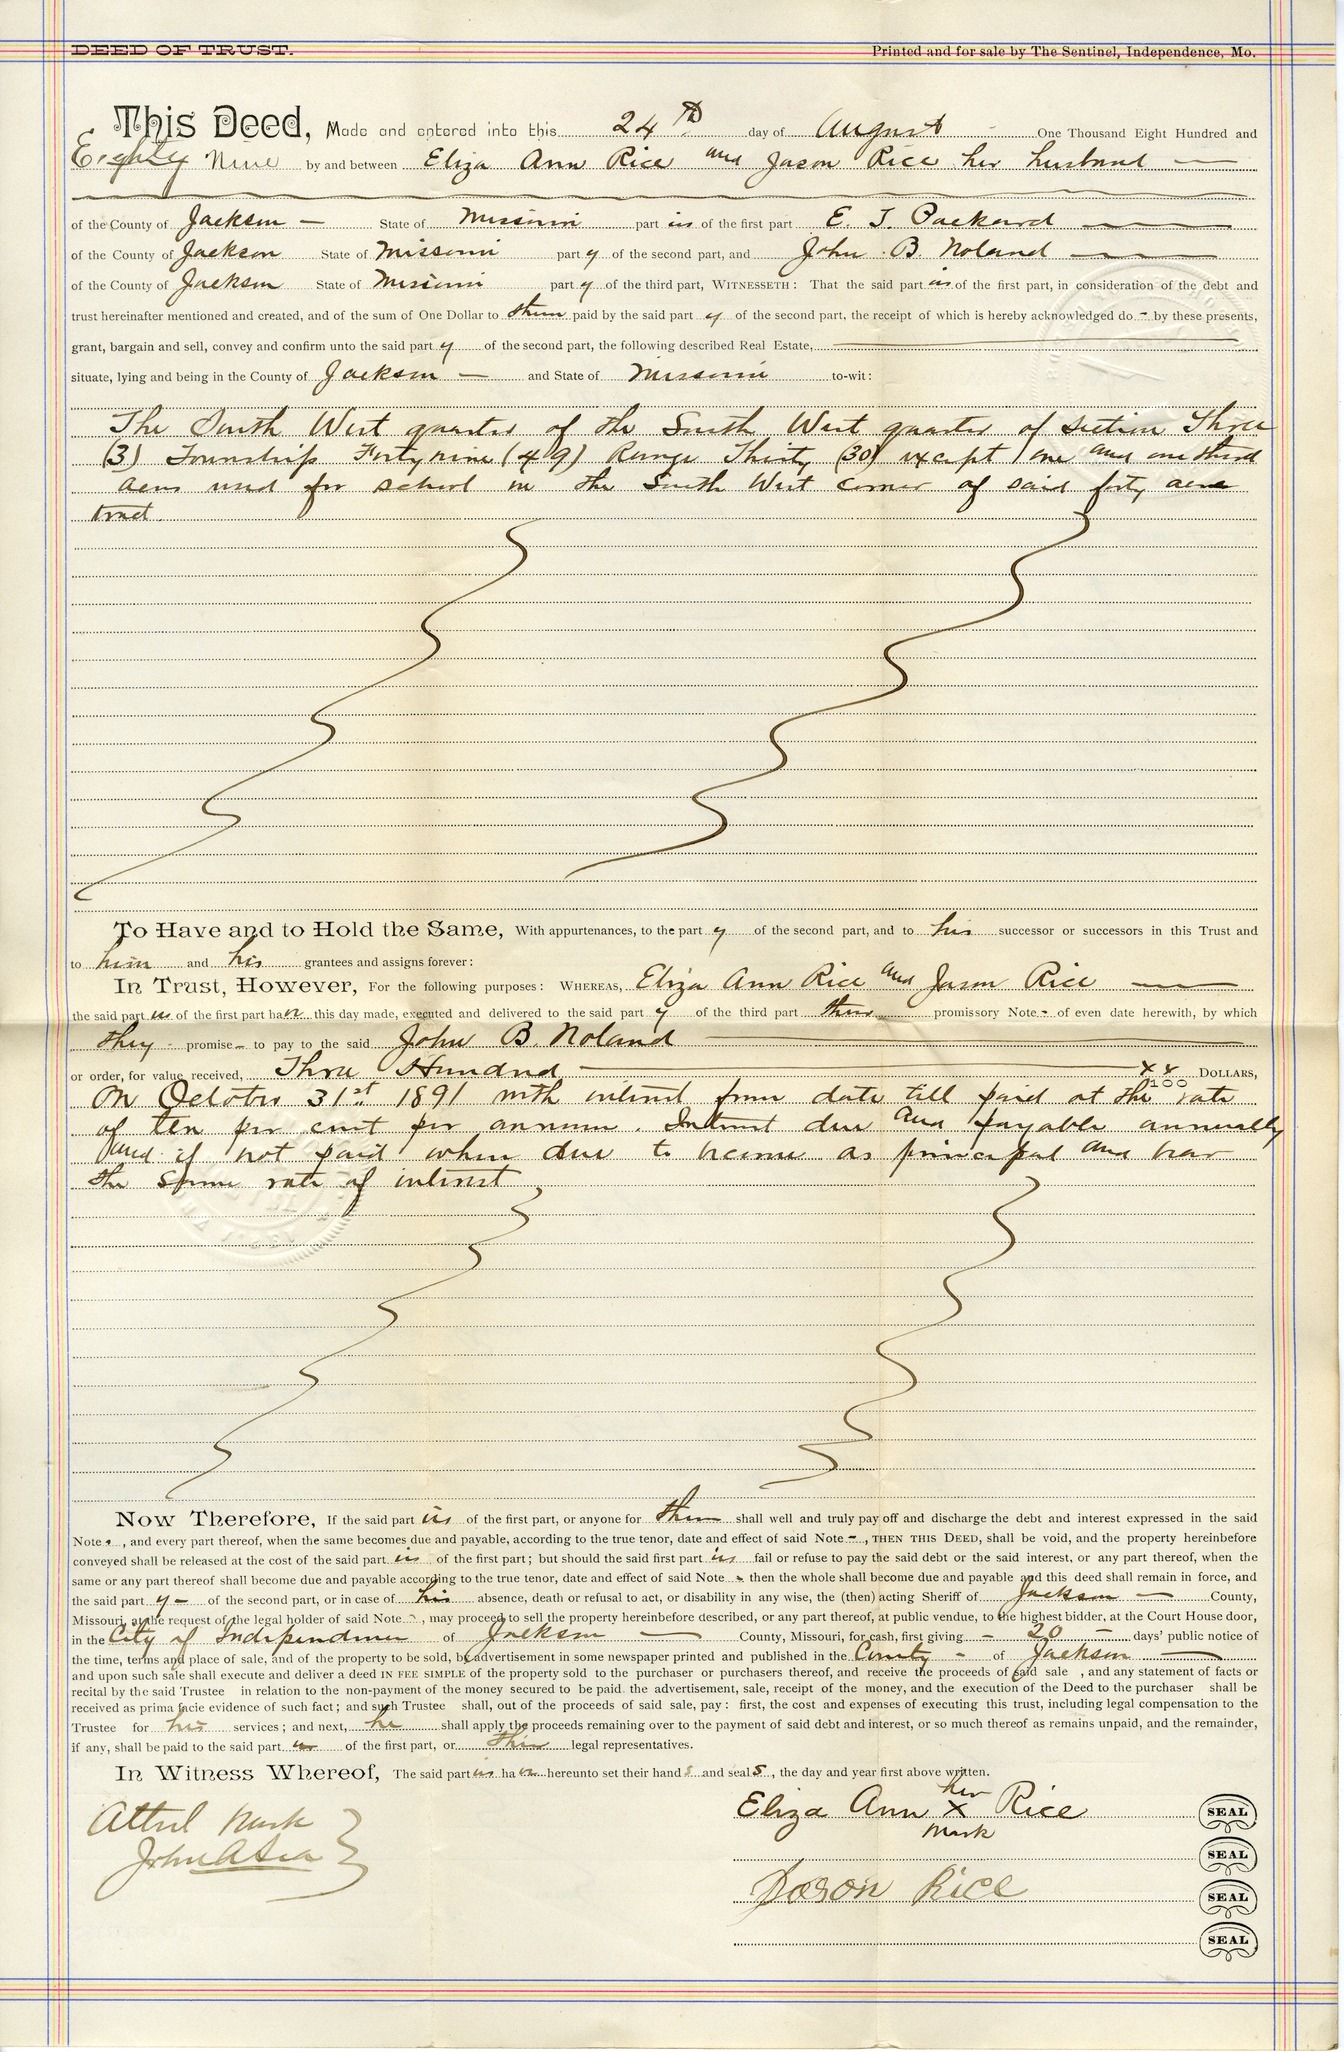 Deed of Trust from Eliza Ann Rice and Jason Rice to E. J. Packard for John B. Noland